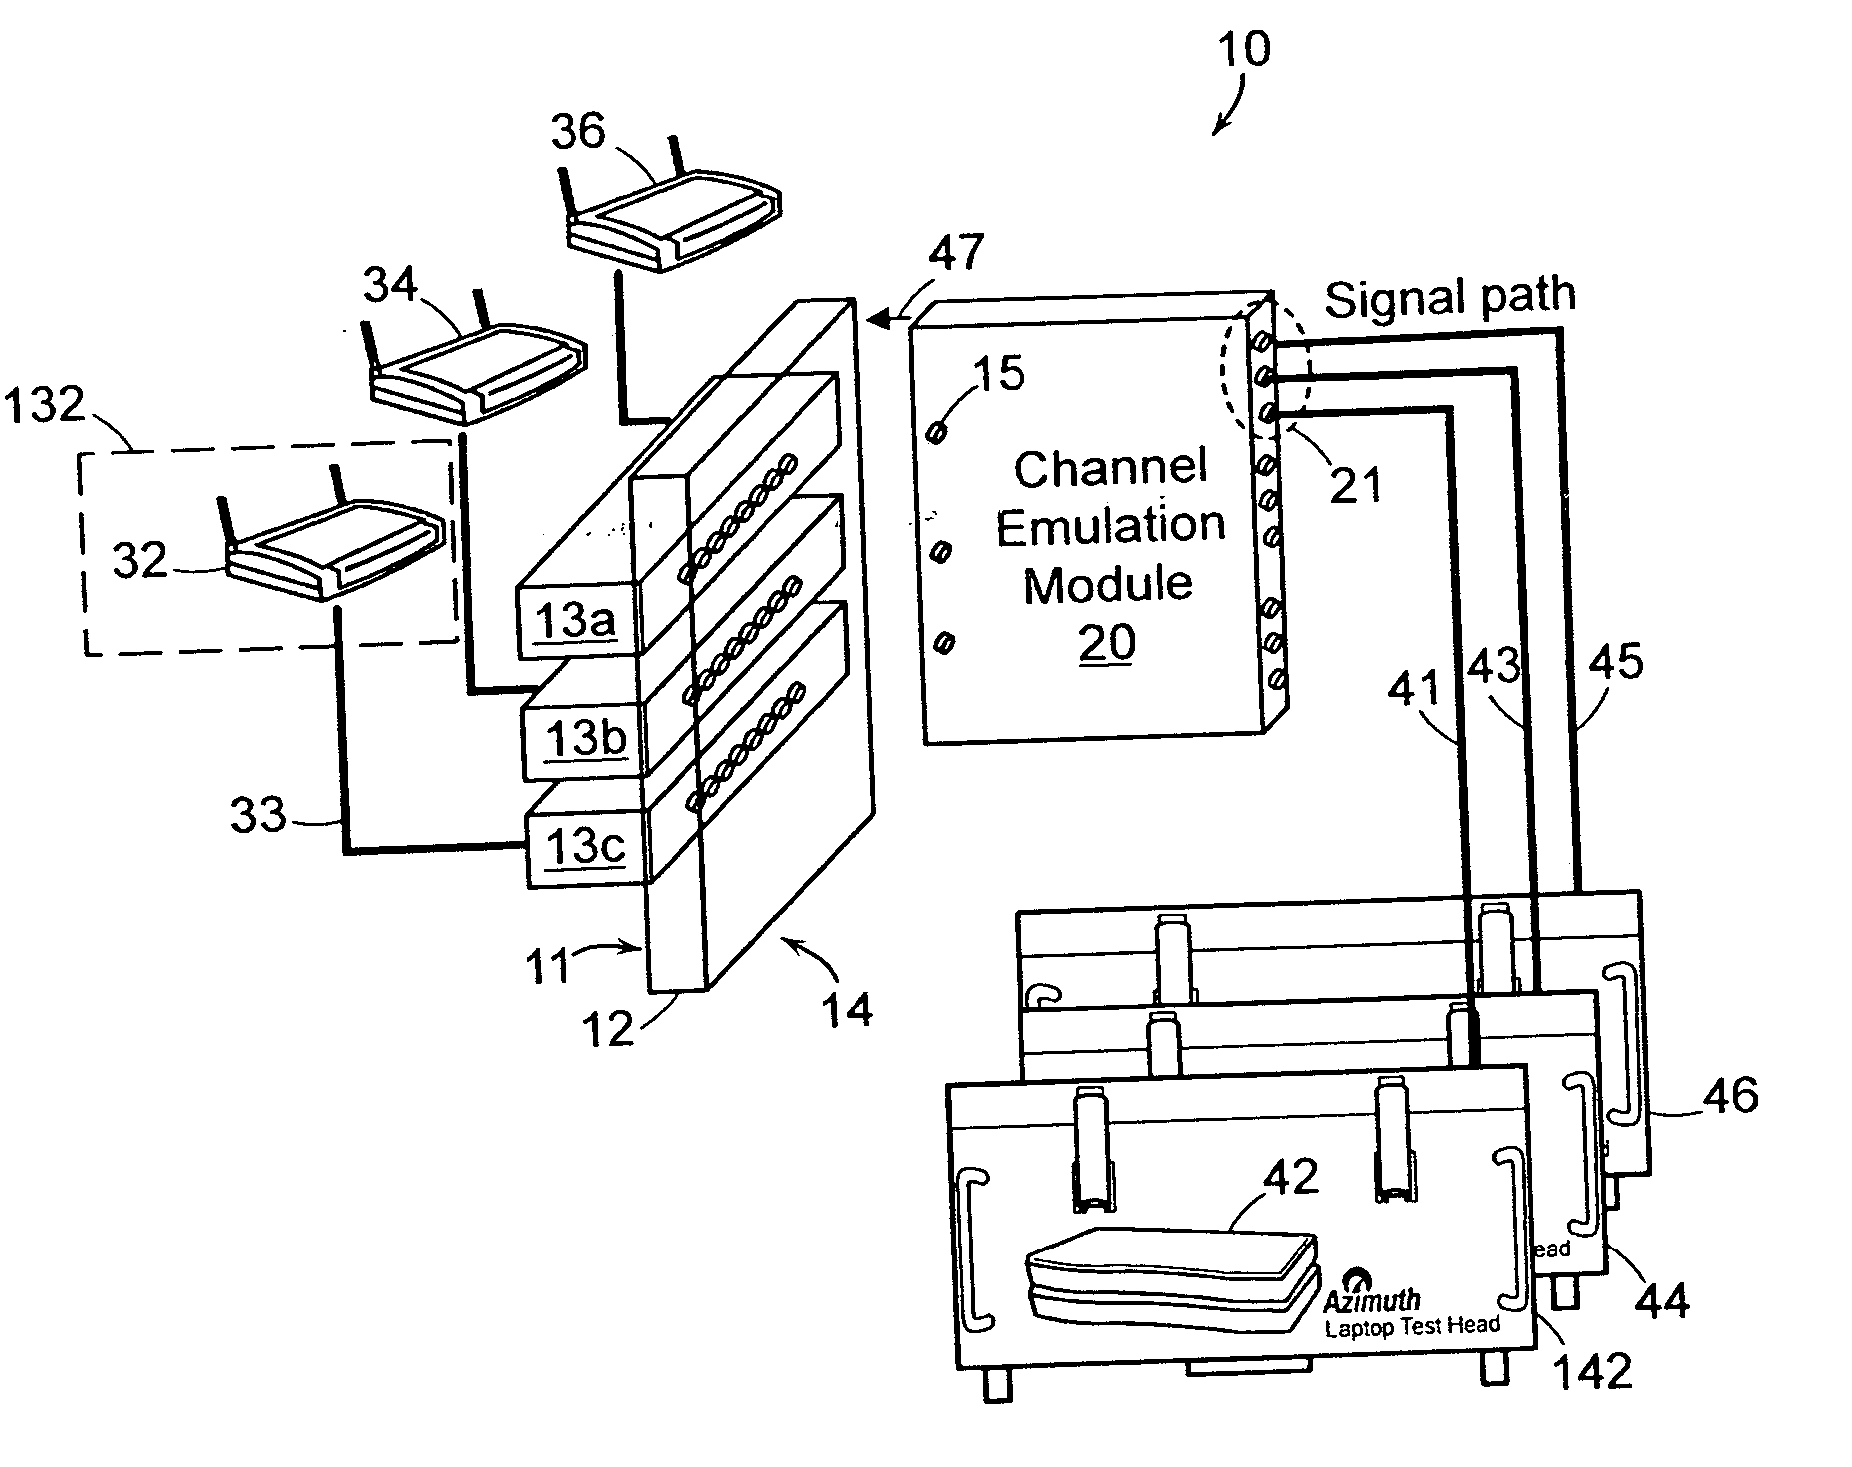 Apparatus and method for use in testing wireless devices